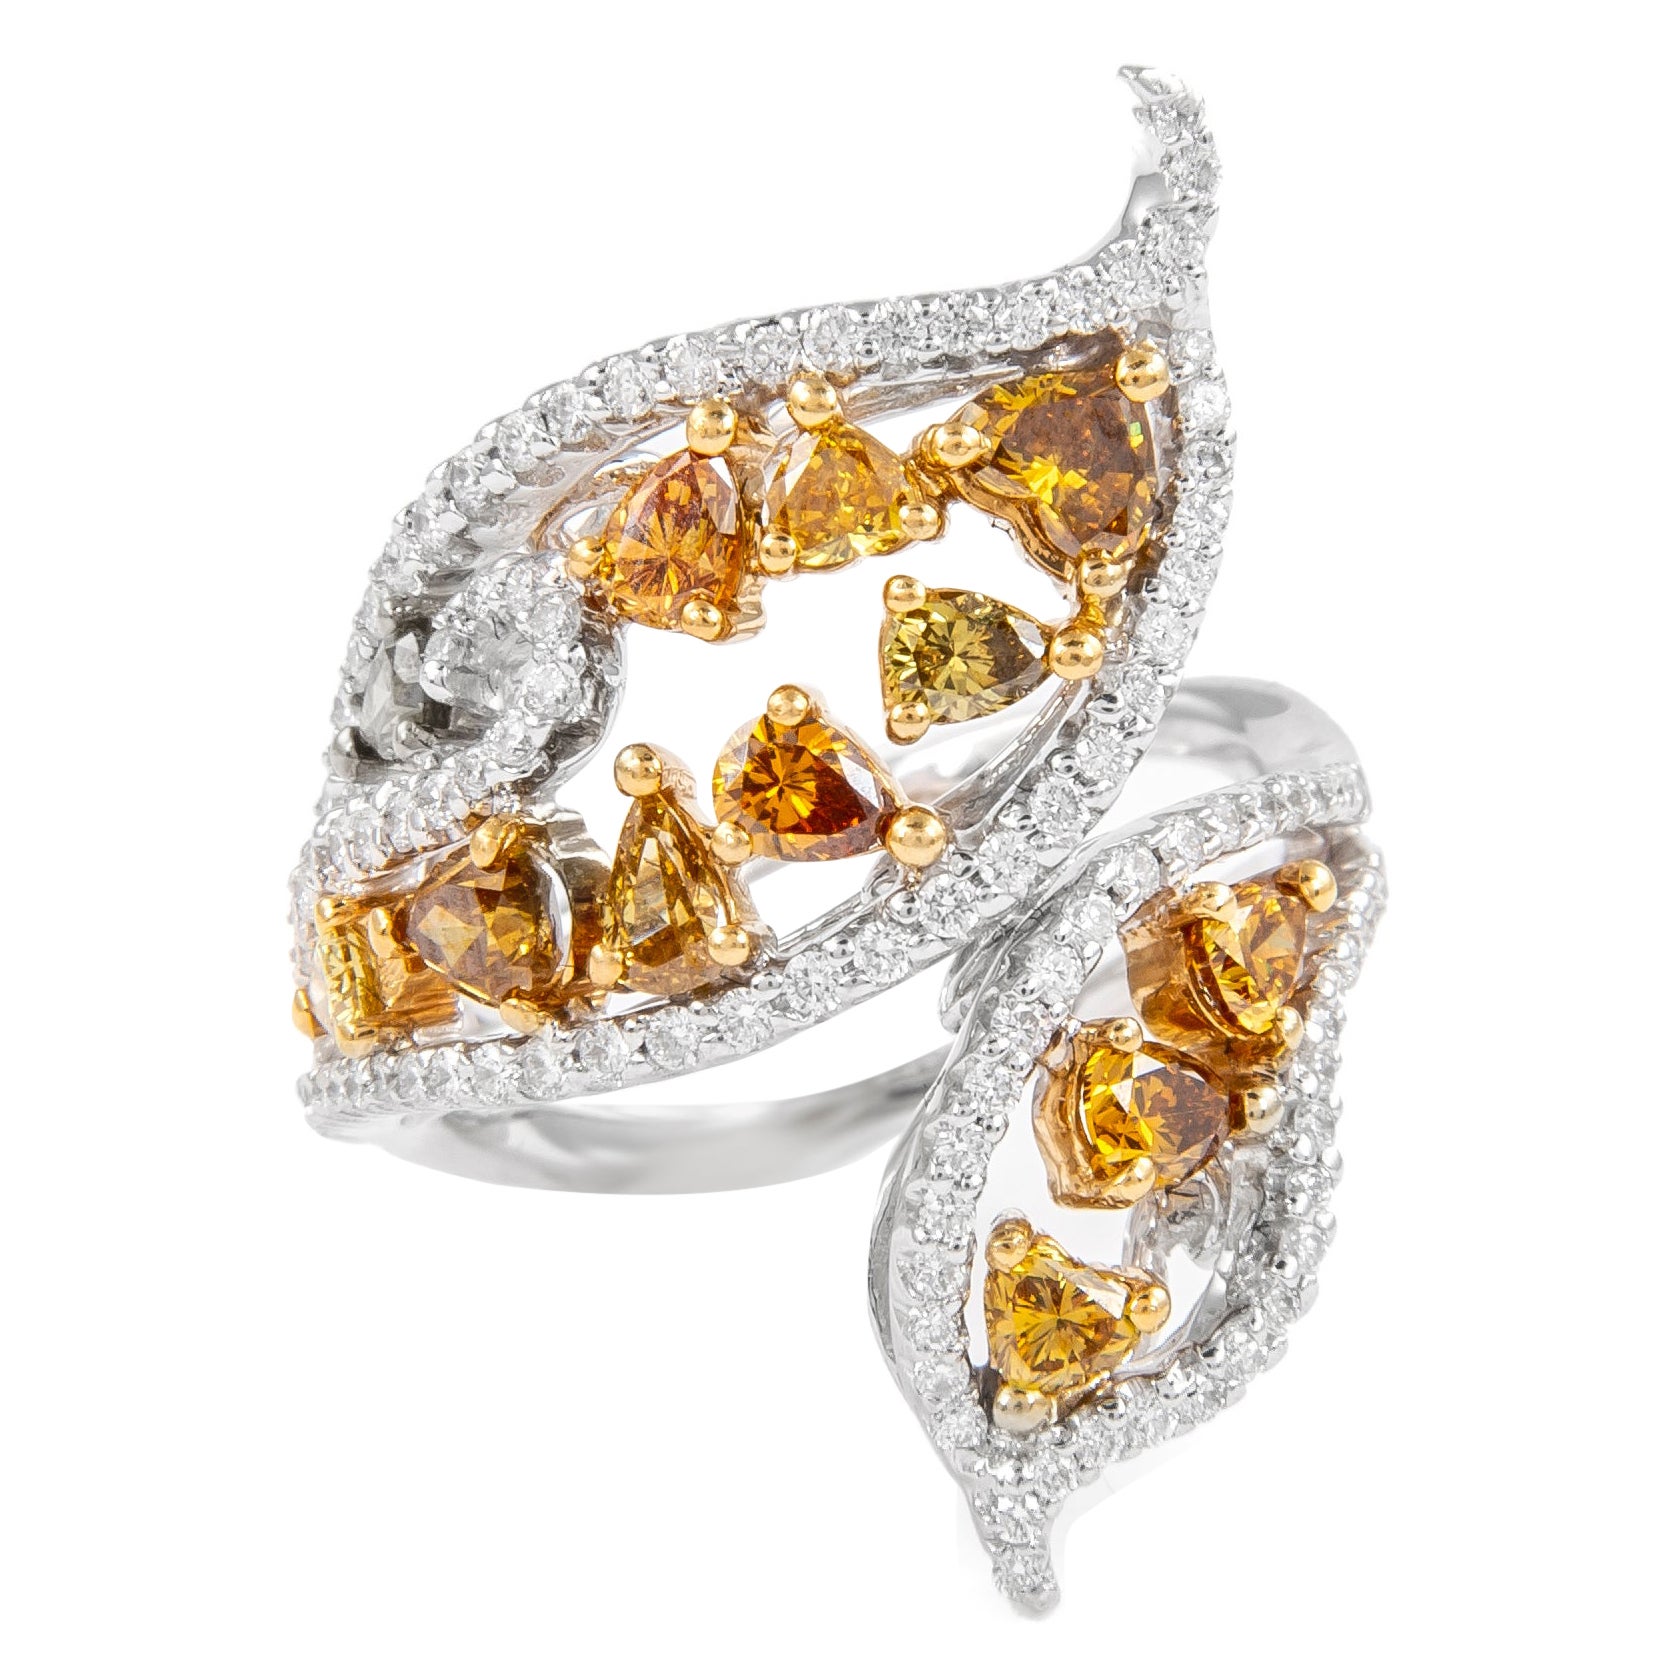 Alexander 2.16ctt Yellow Diamond & Diamond Floral Bypass Ring 18k Two Tone Gold For Sale